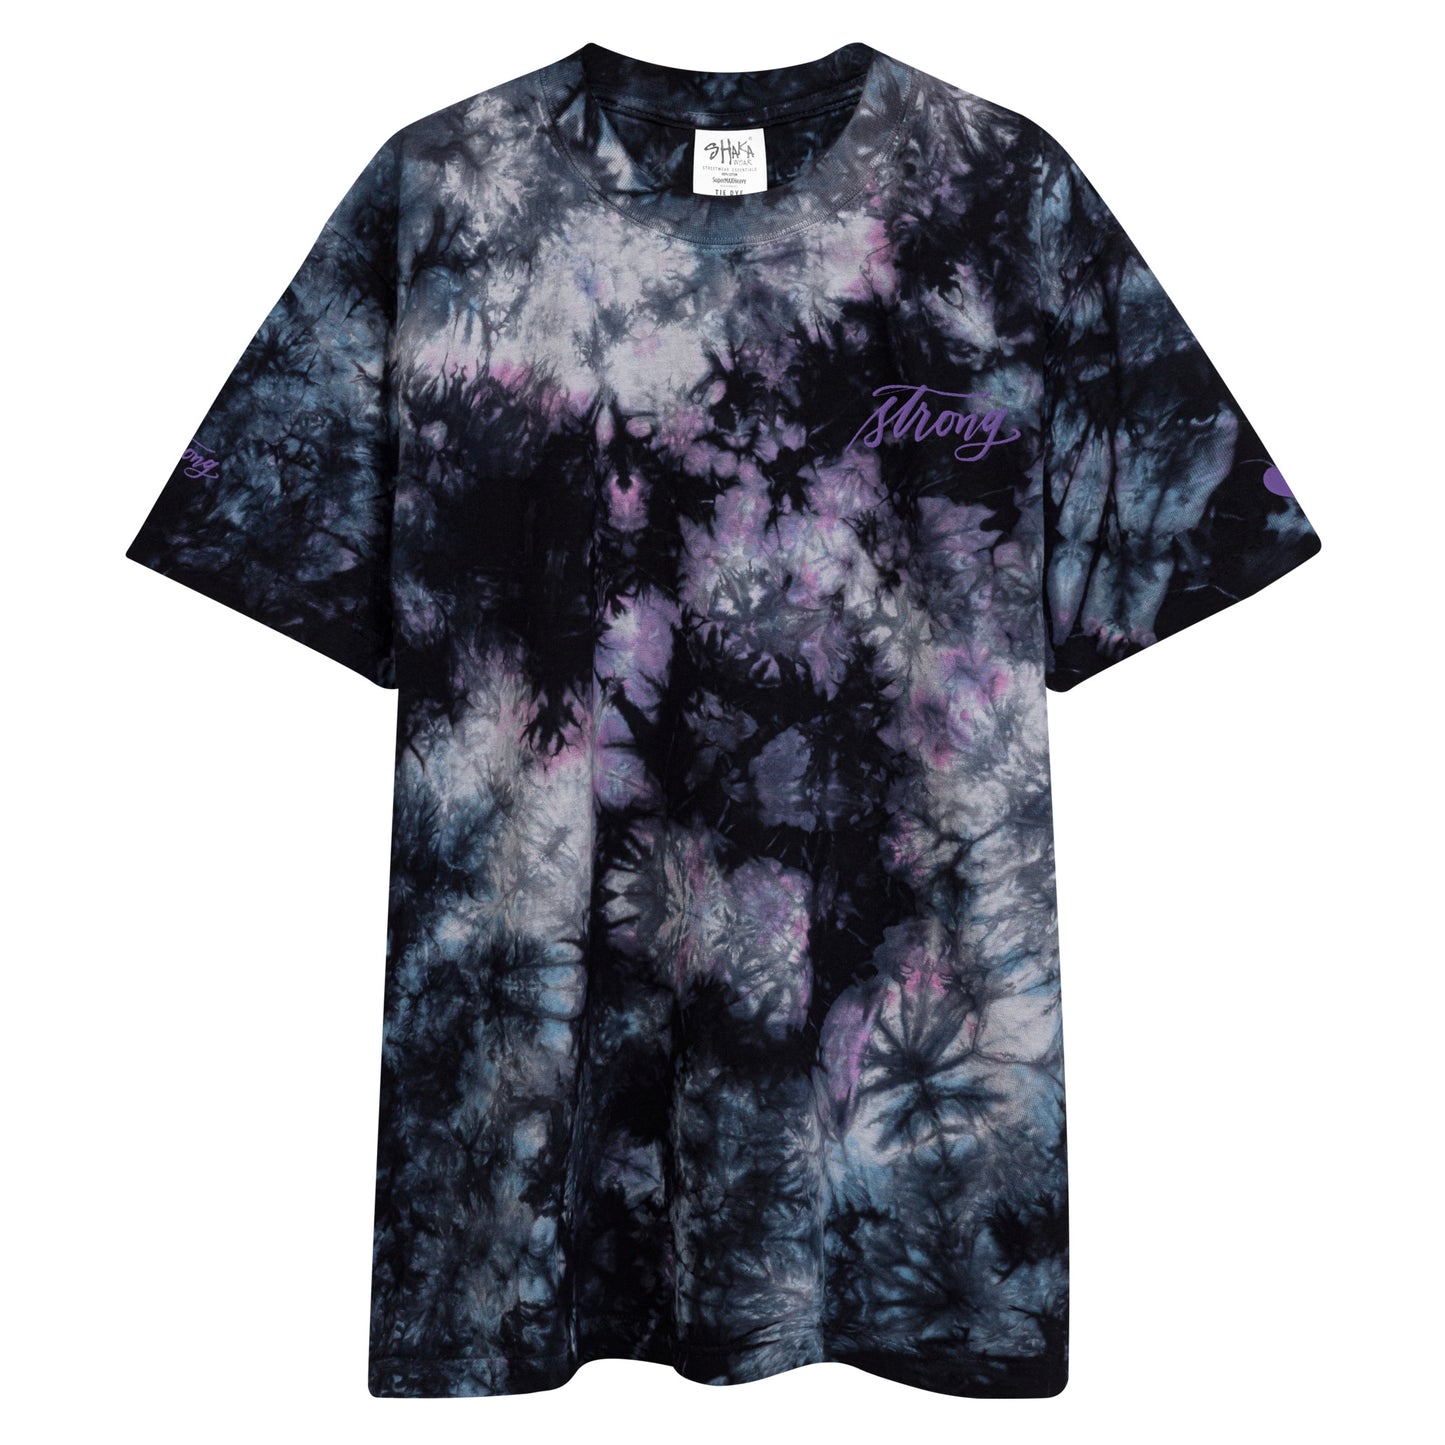 Embroidered Purple "Strong" Calligraphy Oversized Tie-Dye T-Shirt